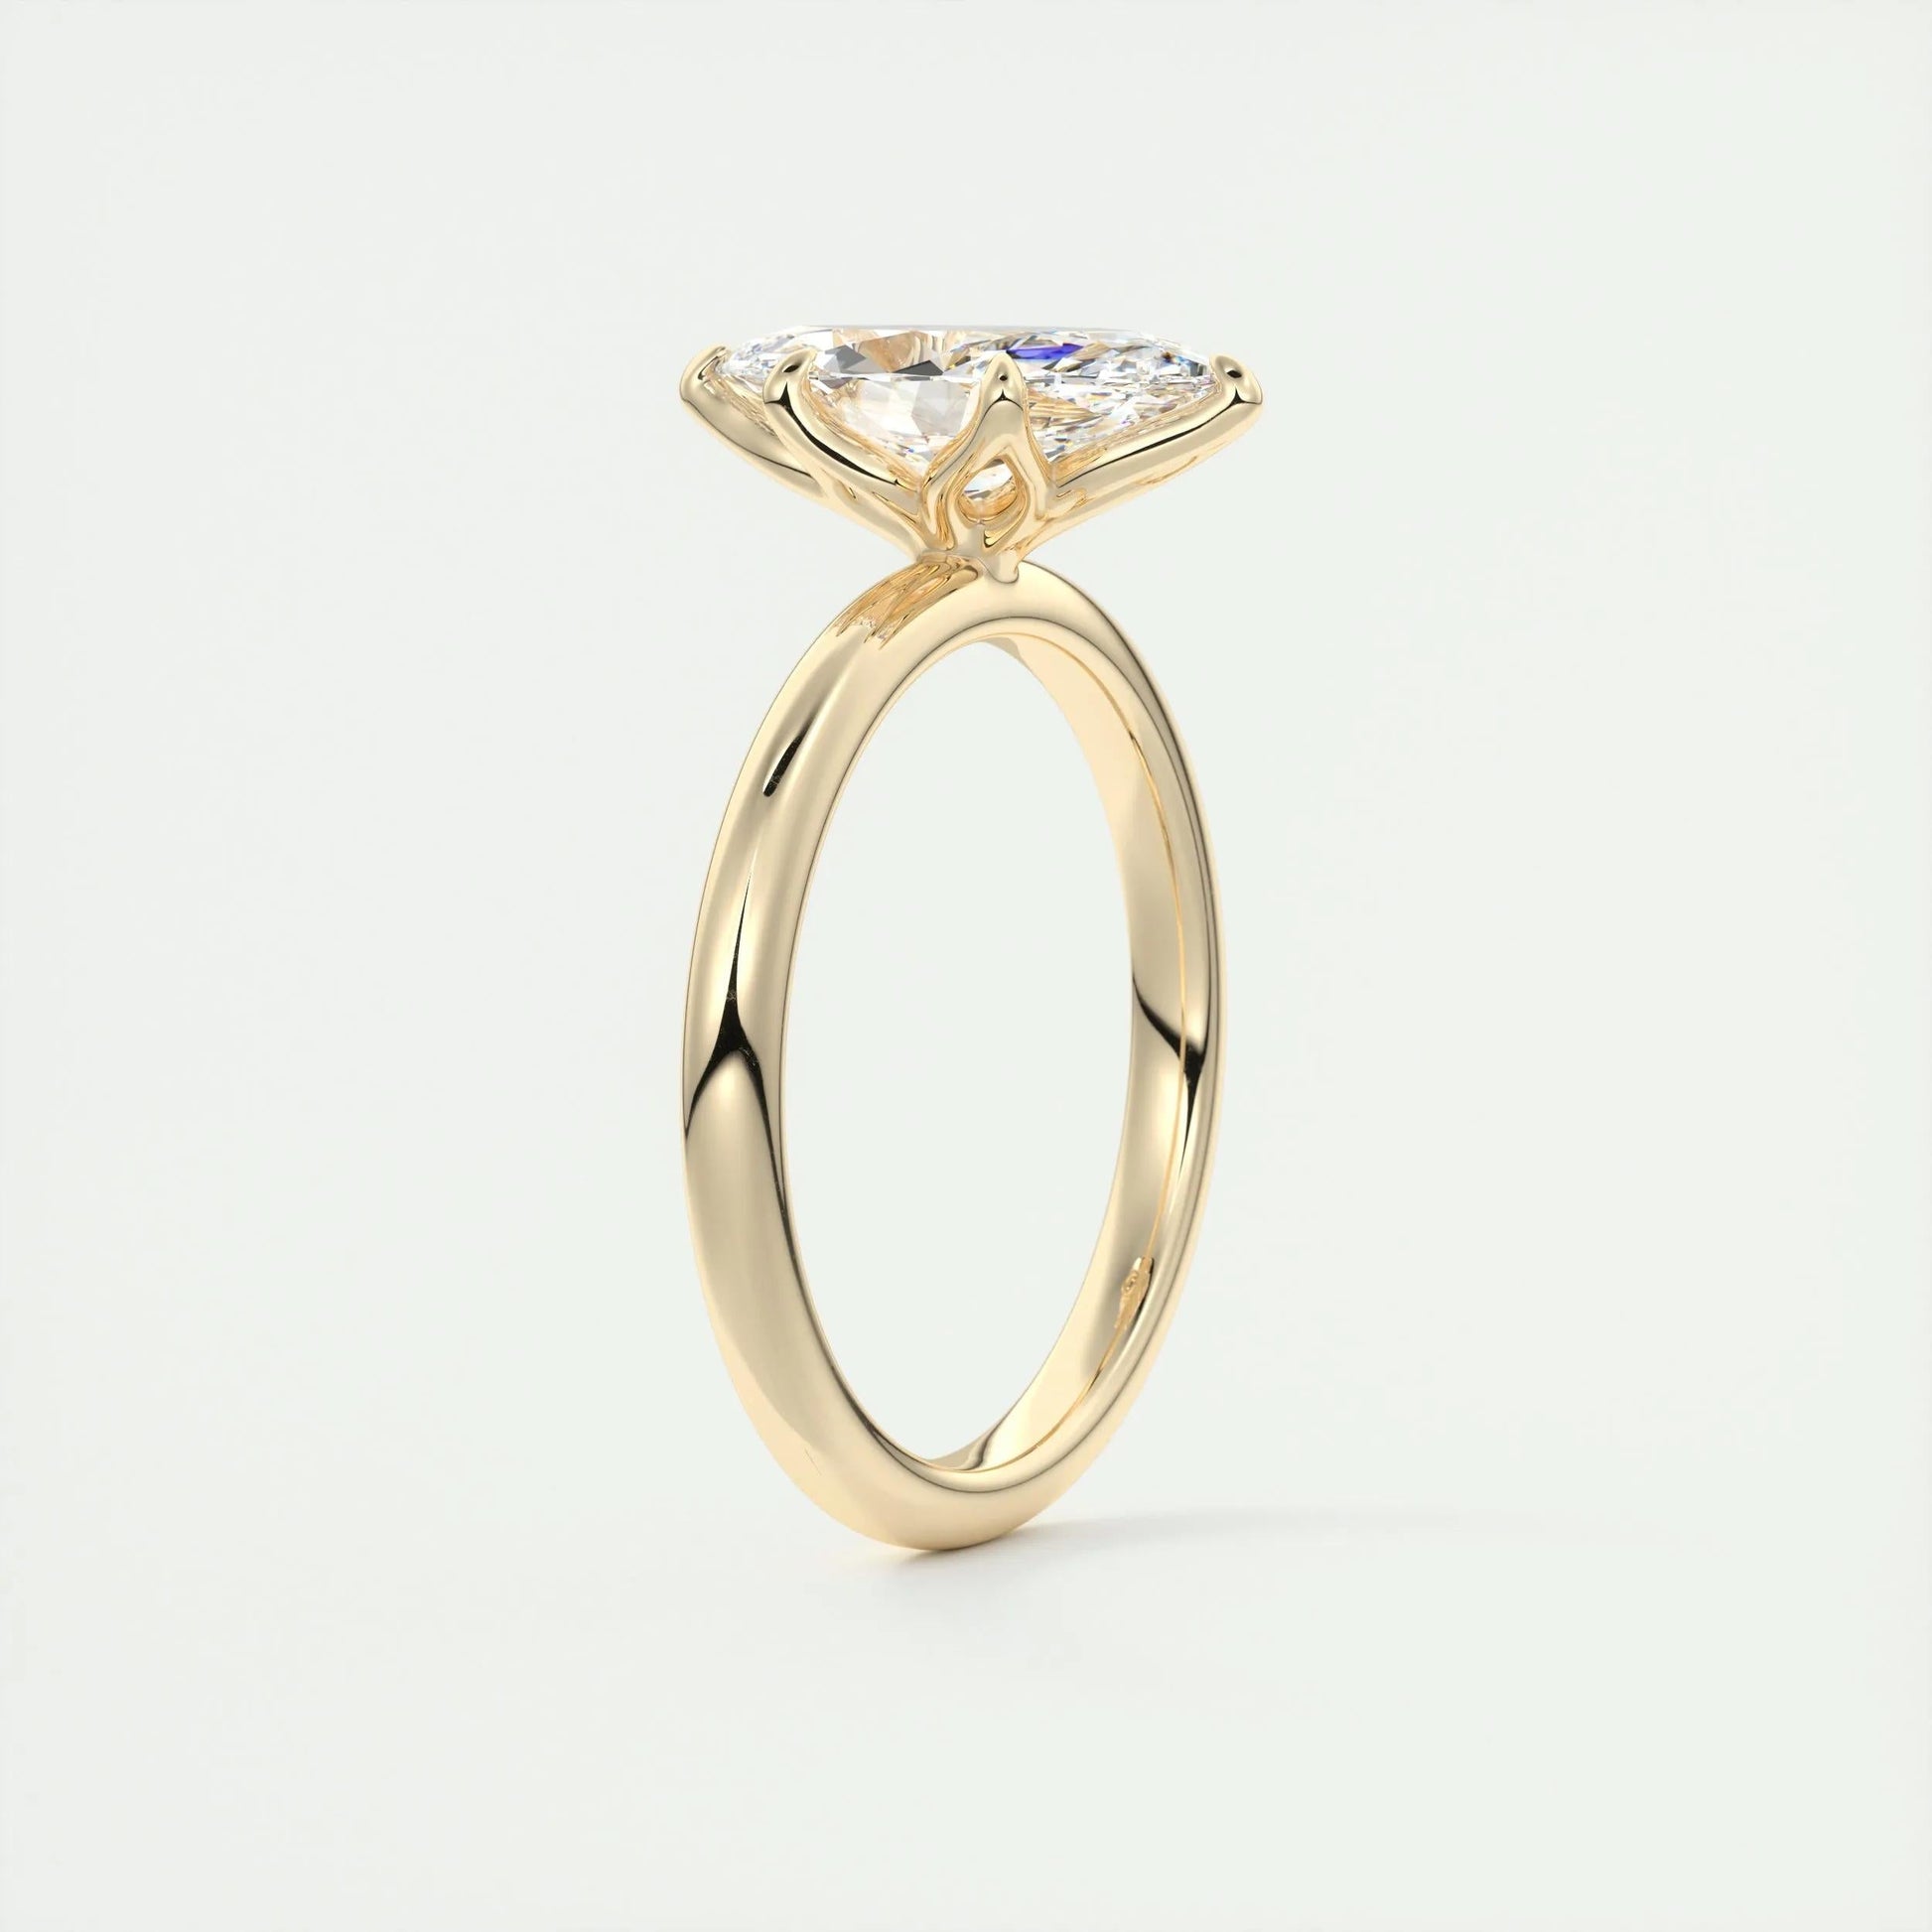 1.5 CT Marquise Solitaire CVD F/VS1 Diamond Engagement Ring 13